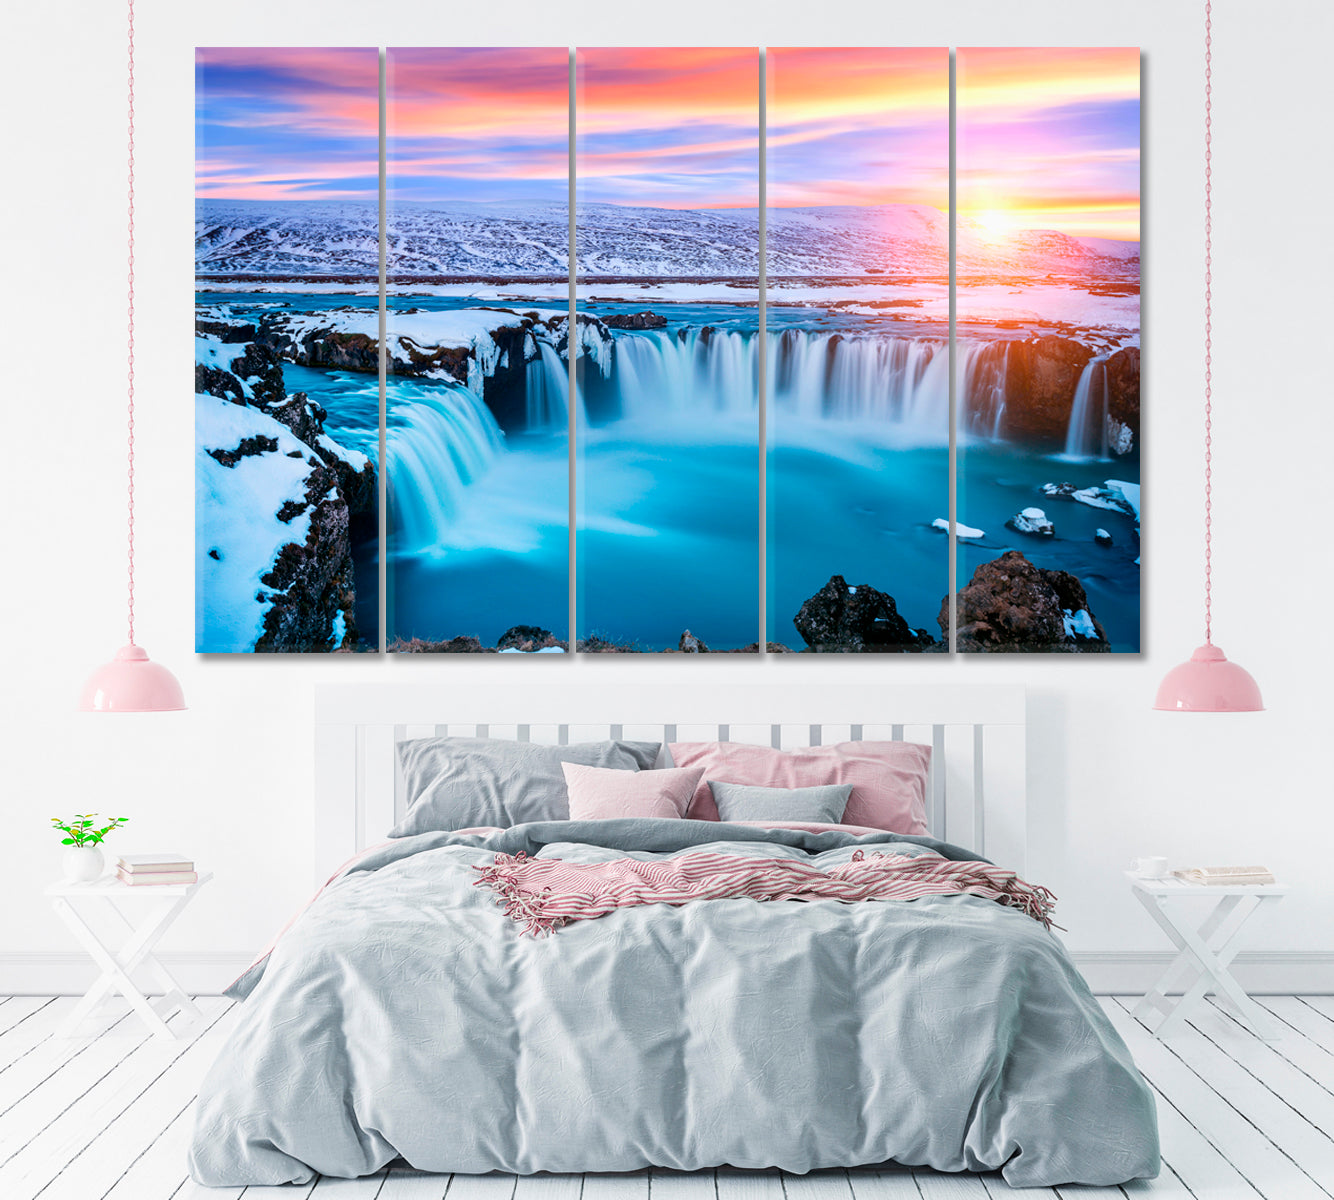 Godafoss Waterfall Iceland Canvas Print ArtLexy 5 Panels 36"x24" inches 